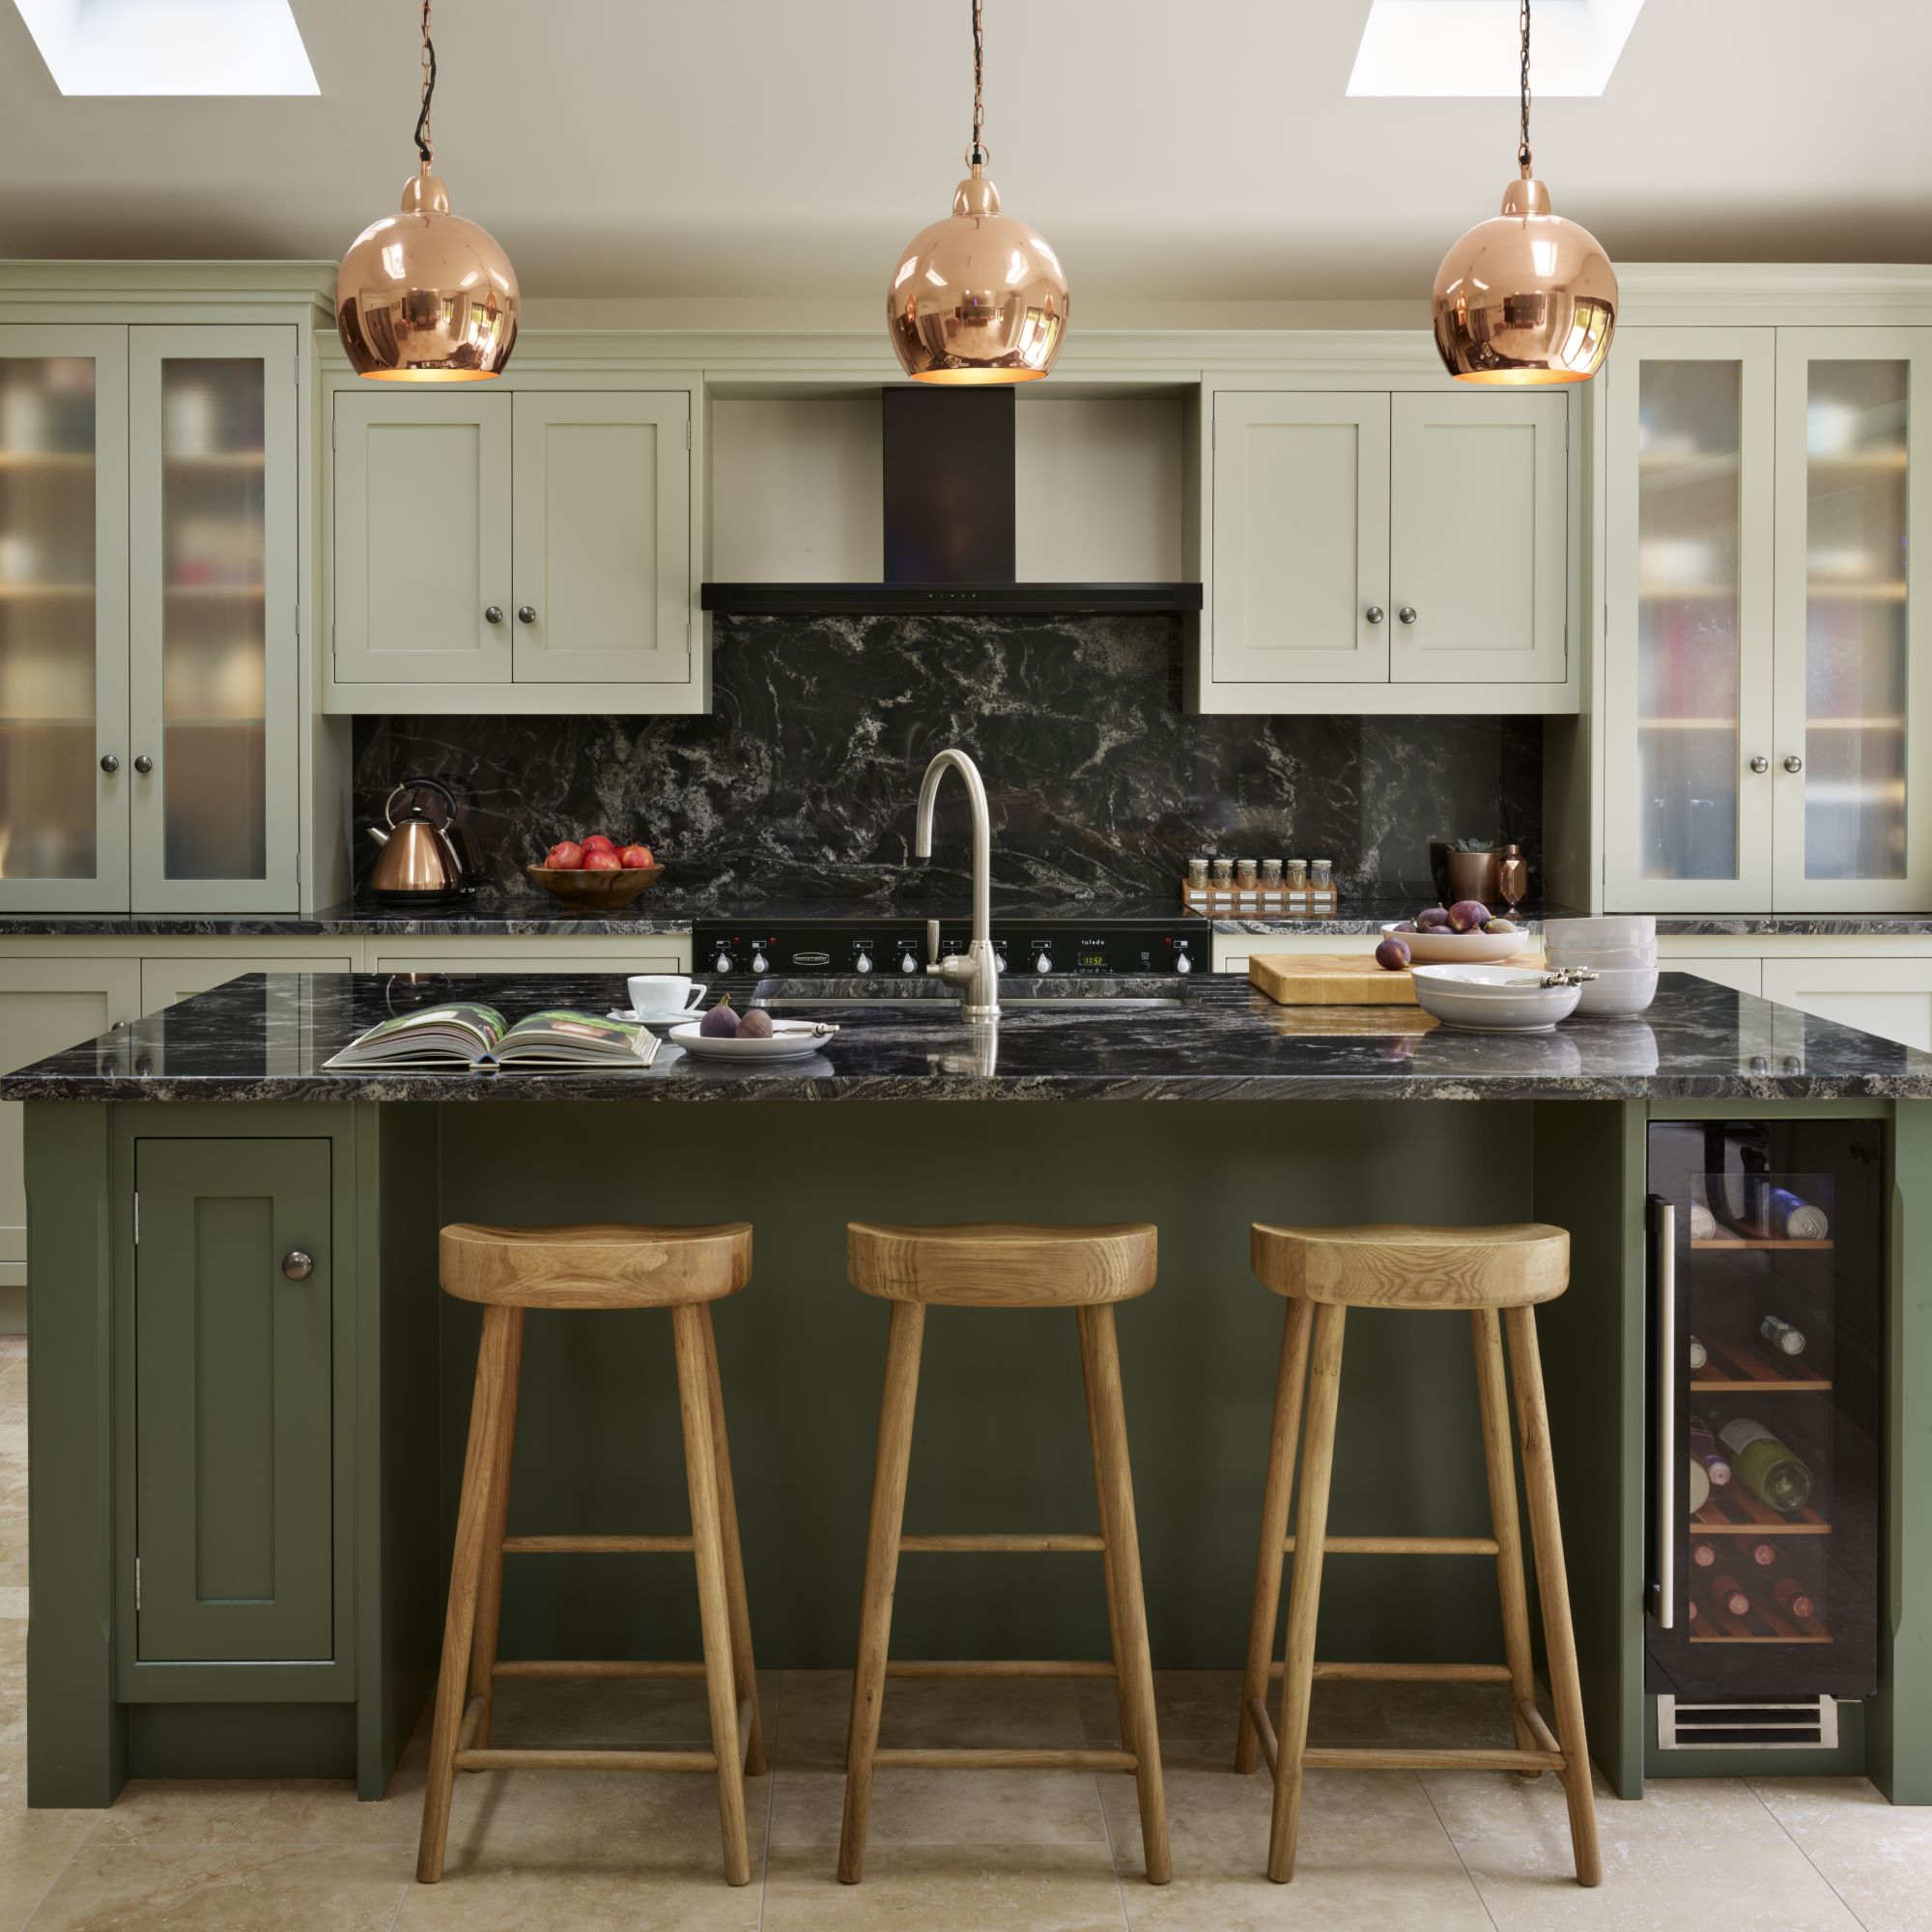 Green Kitchen Ideas – 24 Ways To With Sage And Forest Green | Ideal Home